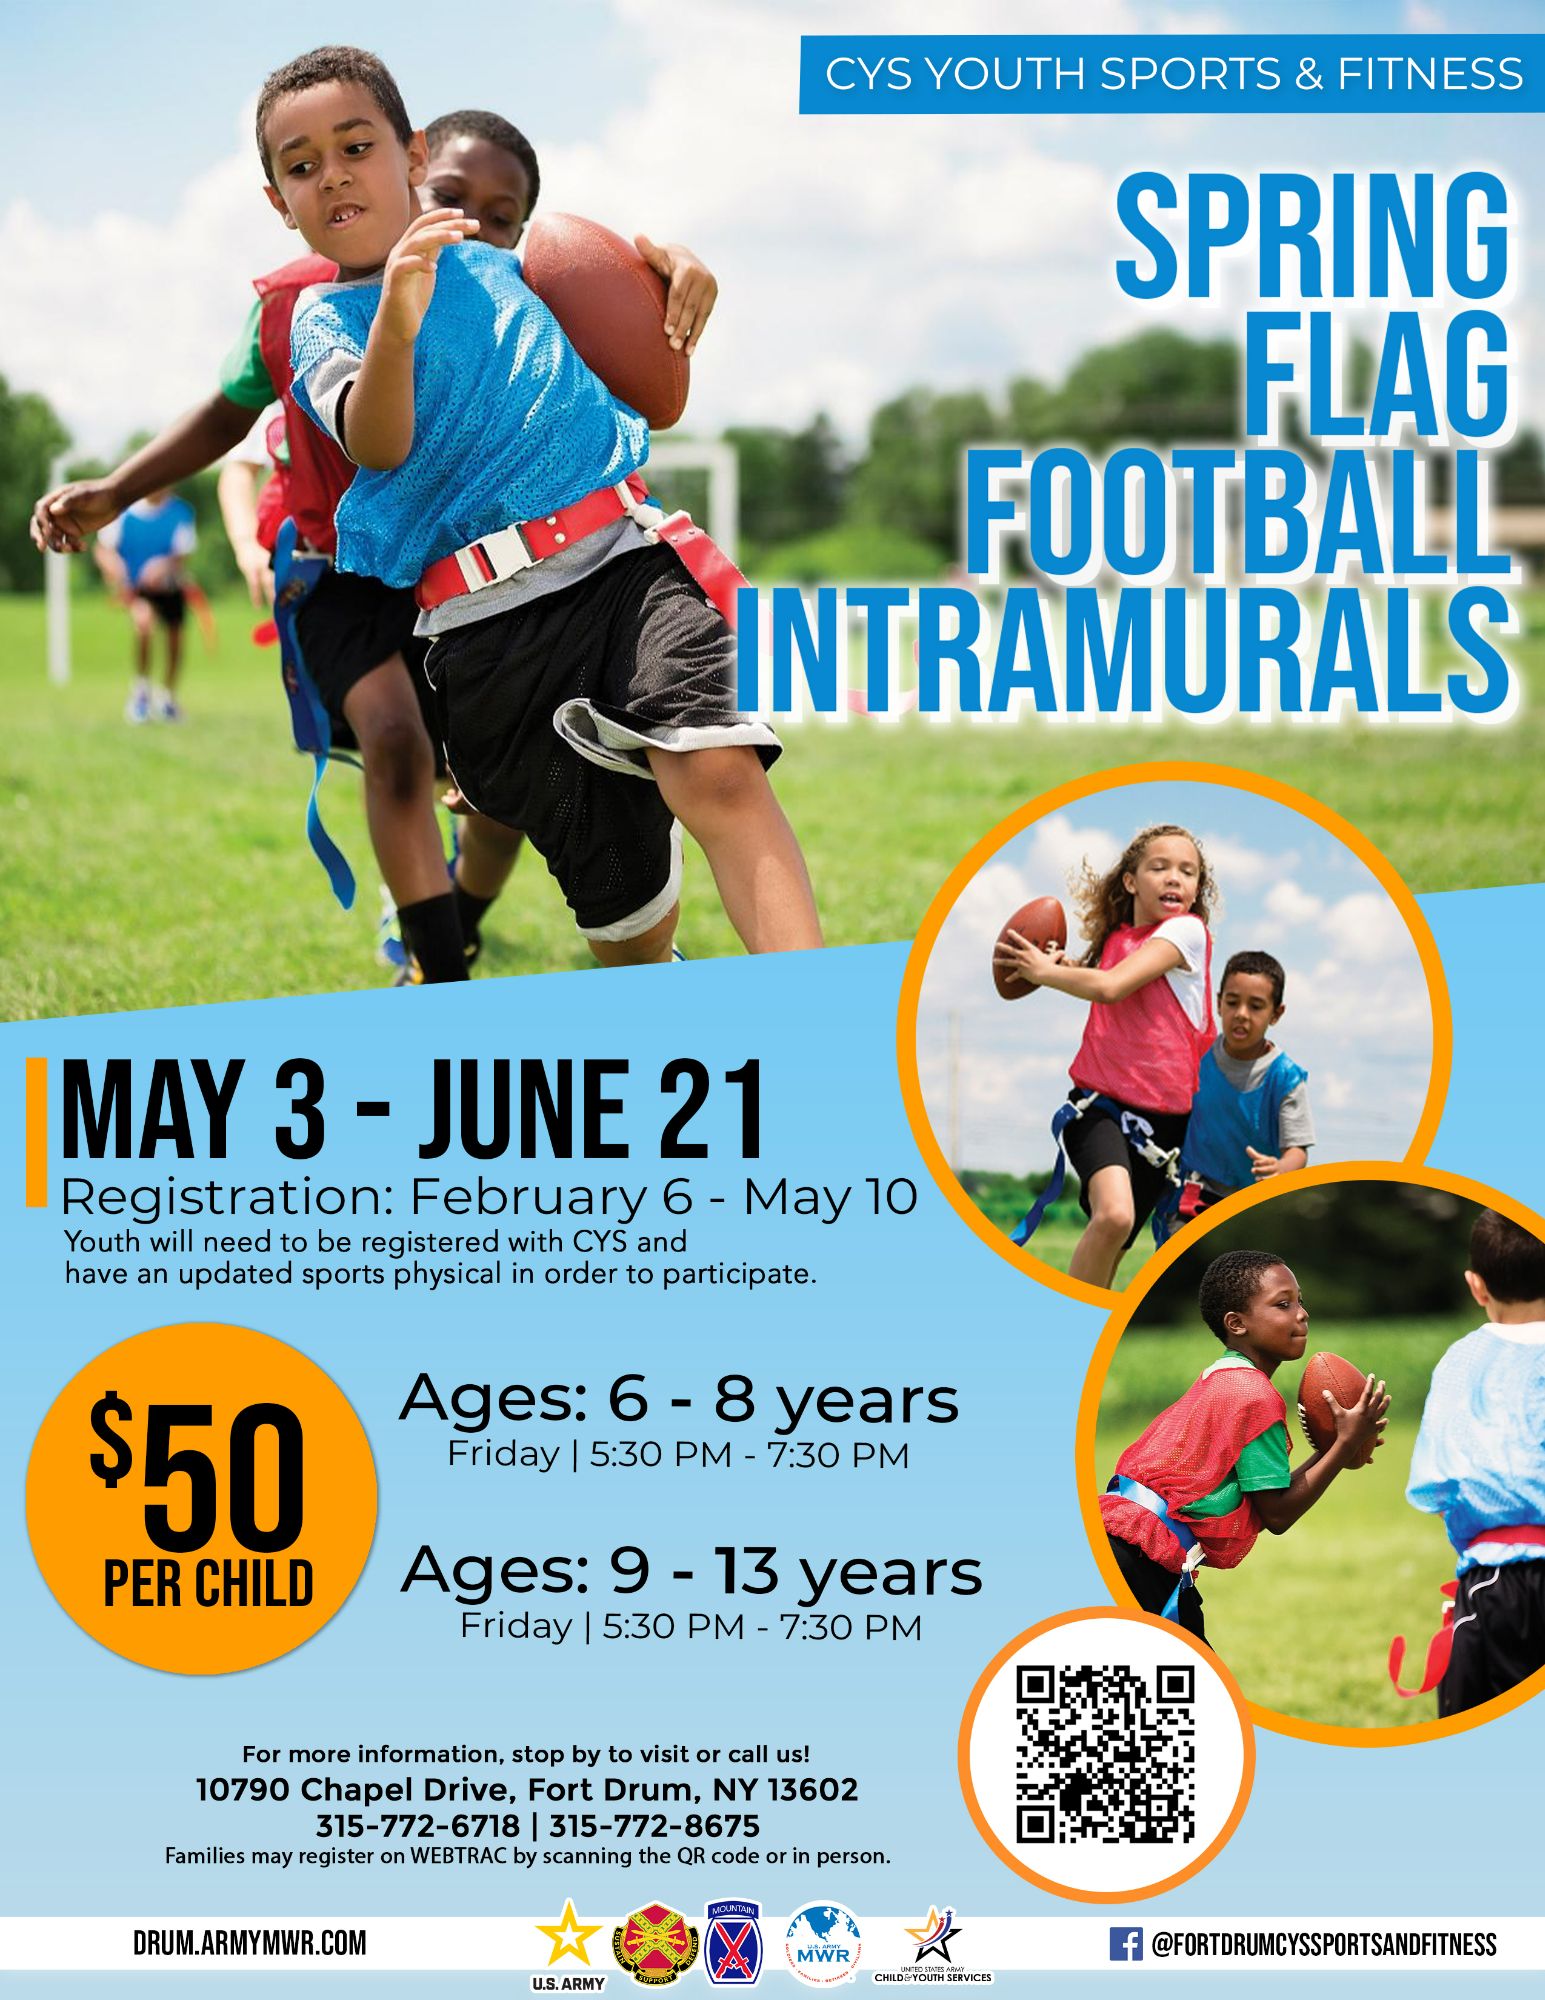 CYS Youth Sports and Fitness